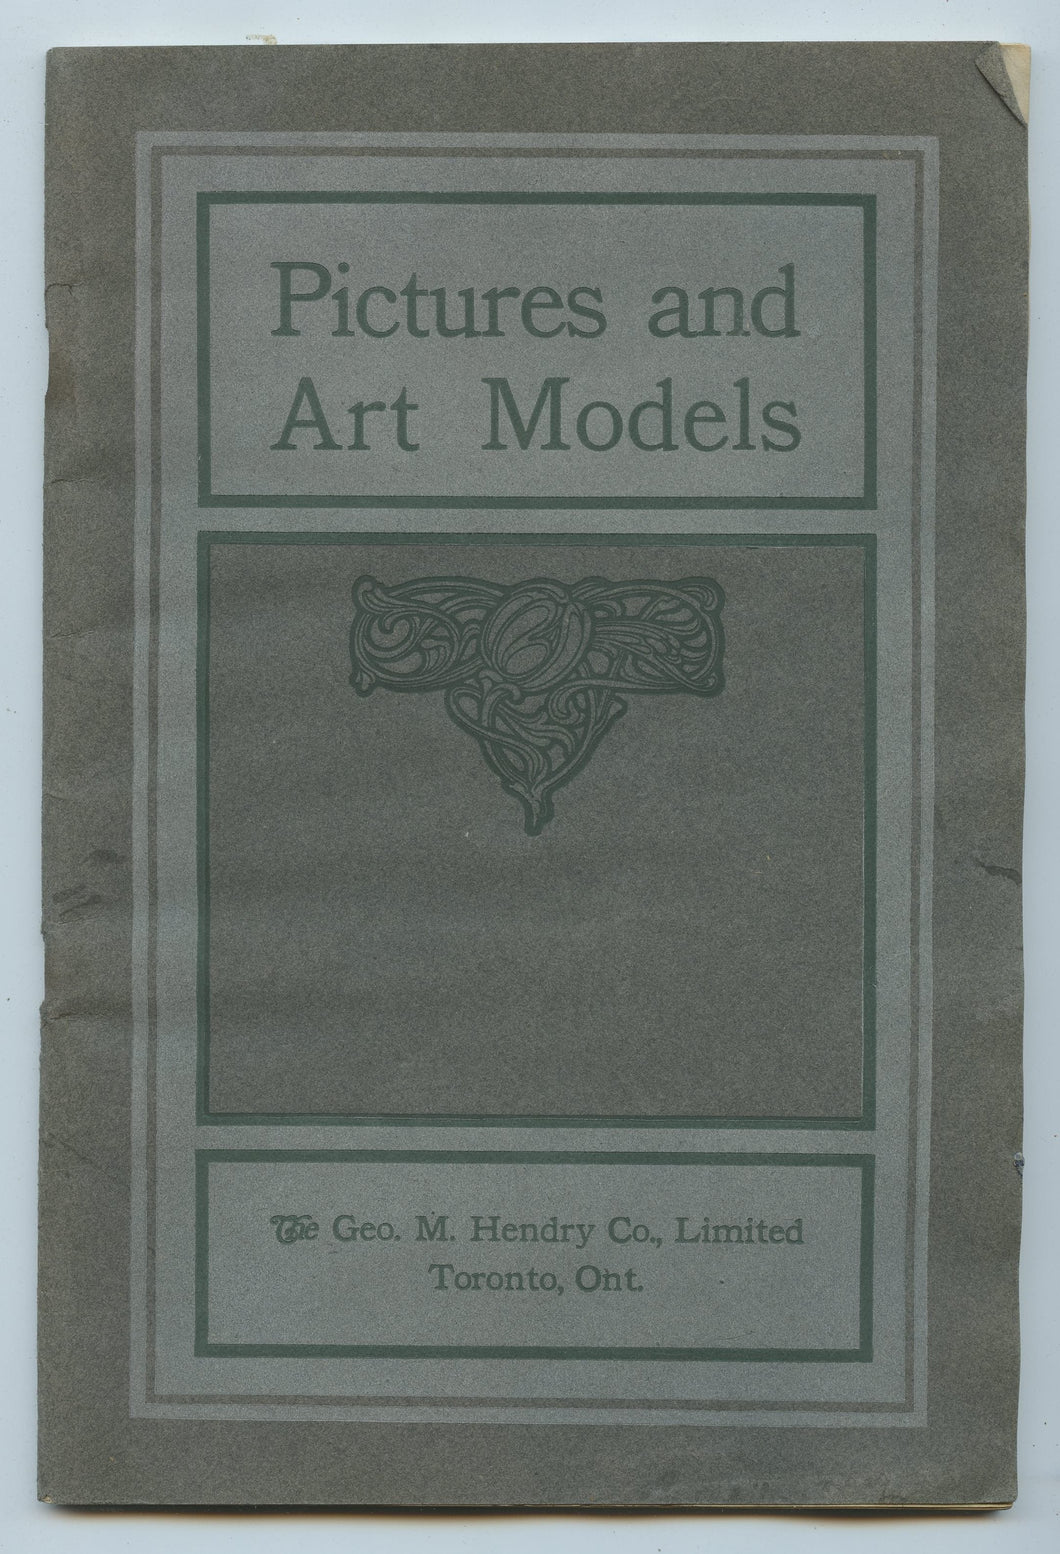 Artistic Pictures, Plaster Casts, Type Solids and Pottery Models. No. 4